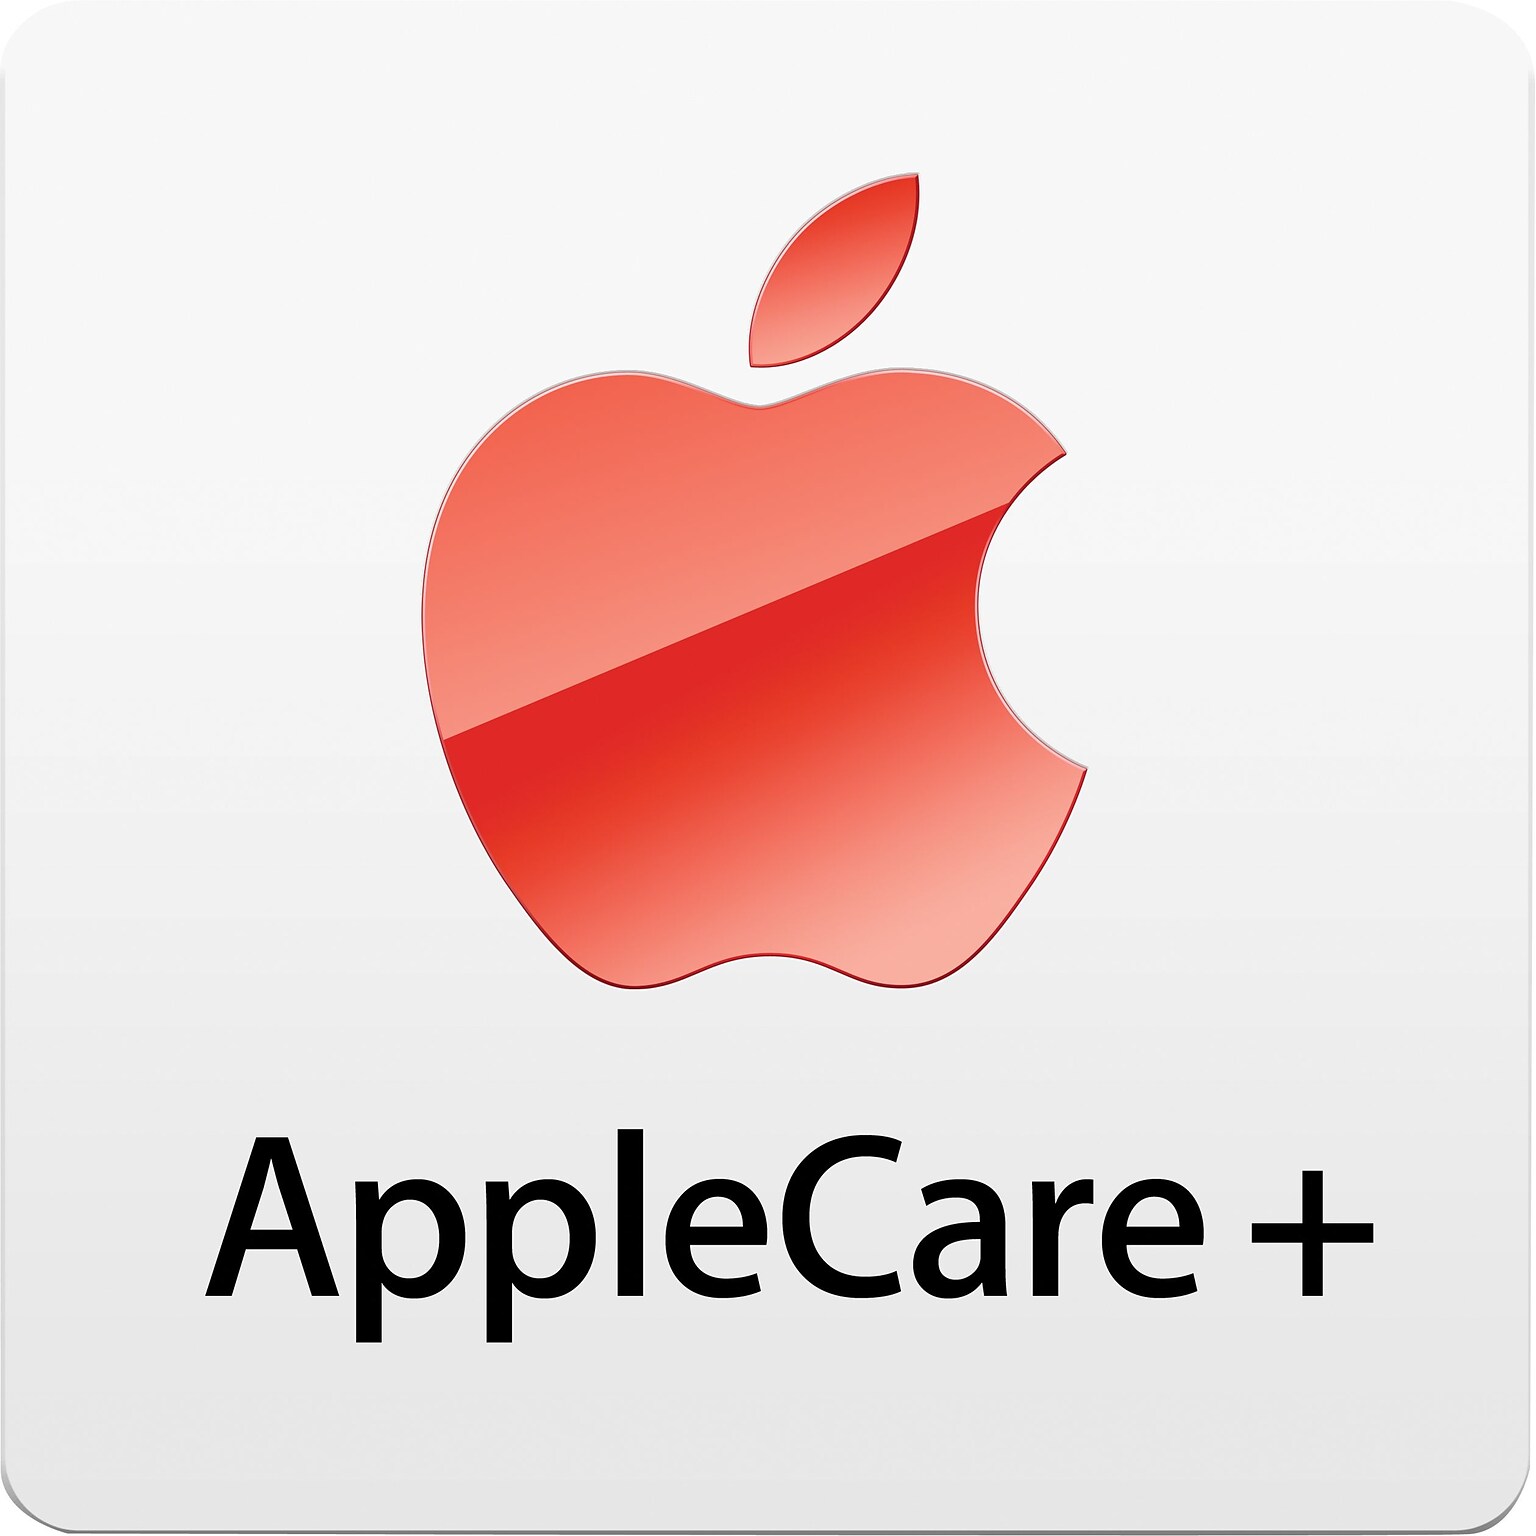 AppleCare+ 2-year Protection Plan for iPad mini with Wi-Fi + Cellular (AT&T) 16GB, White